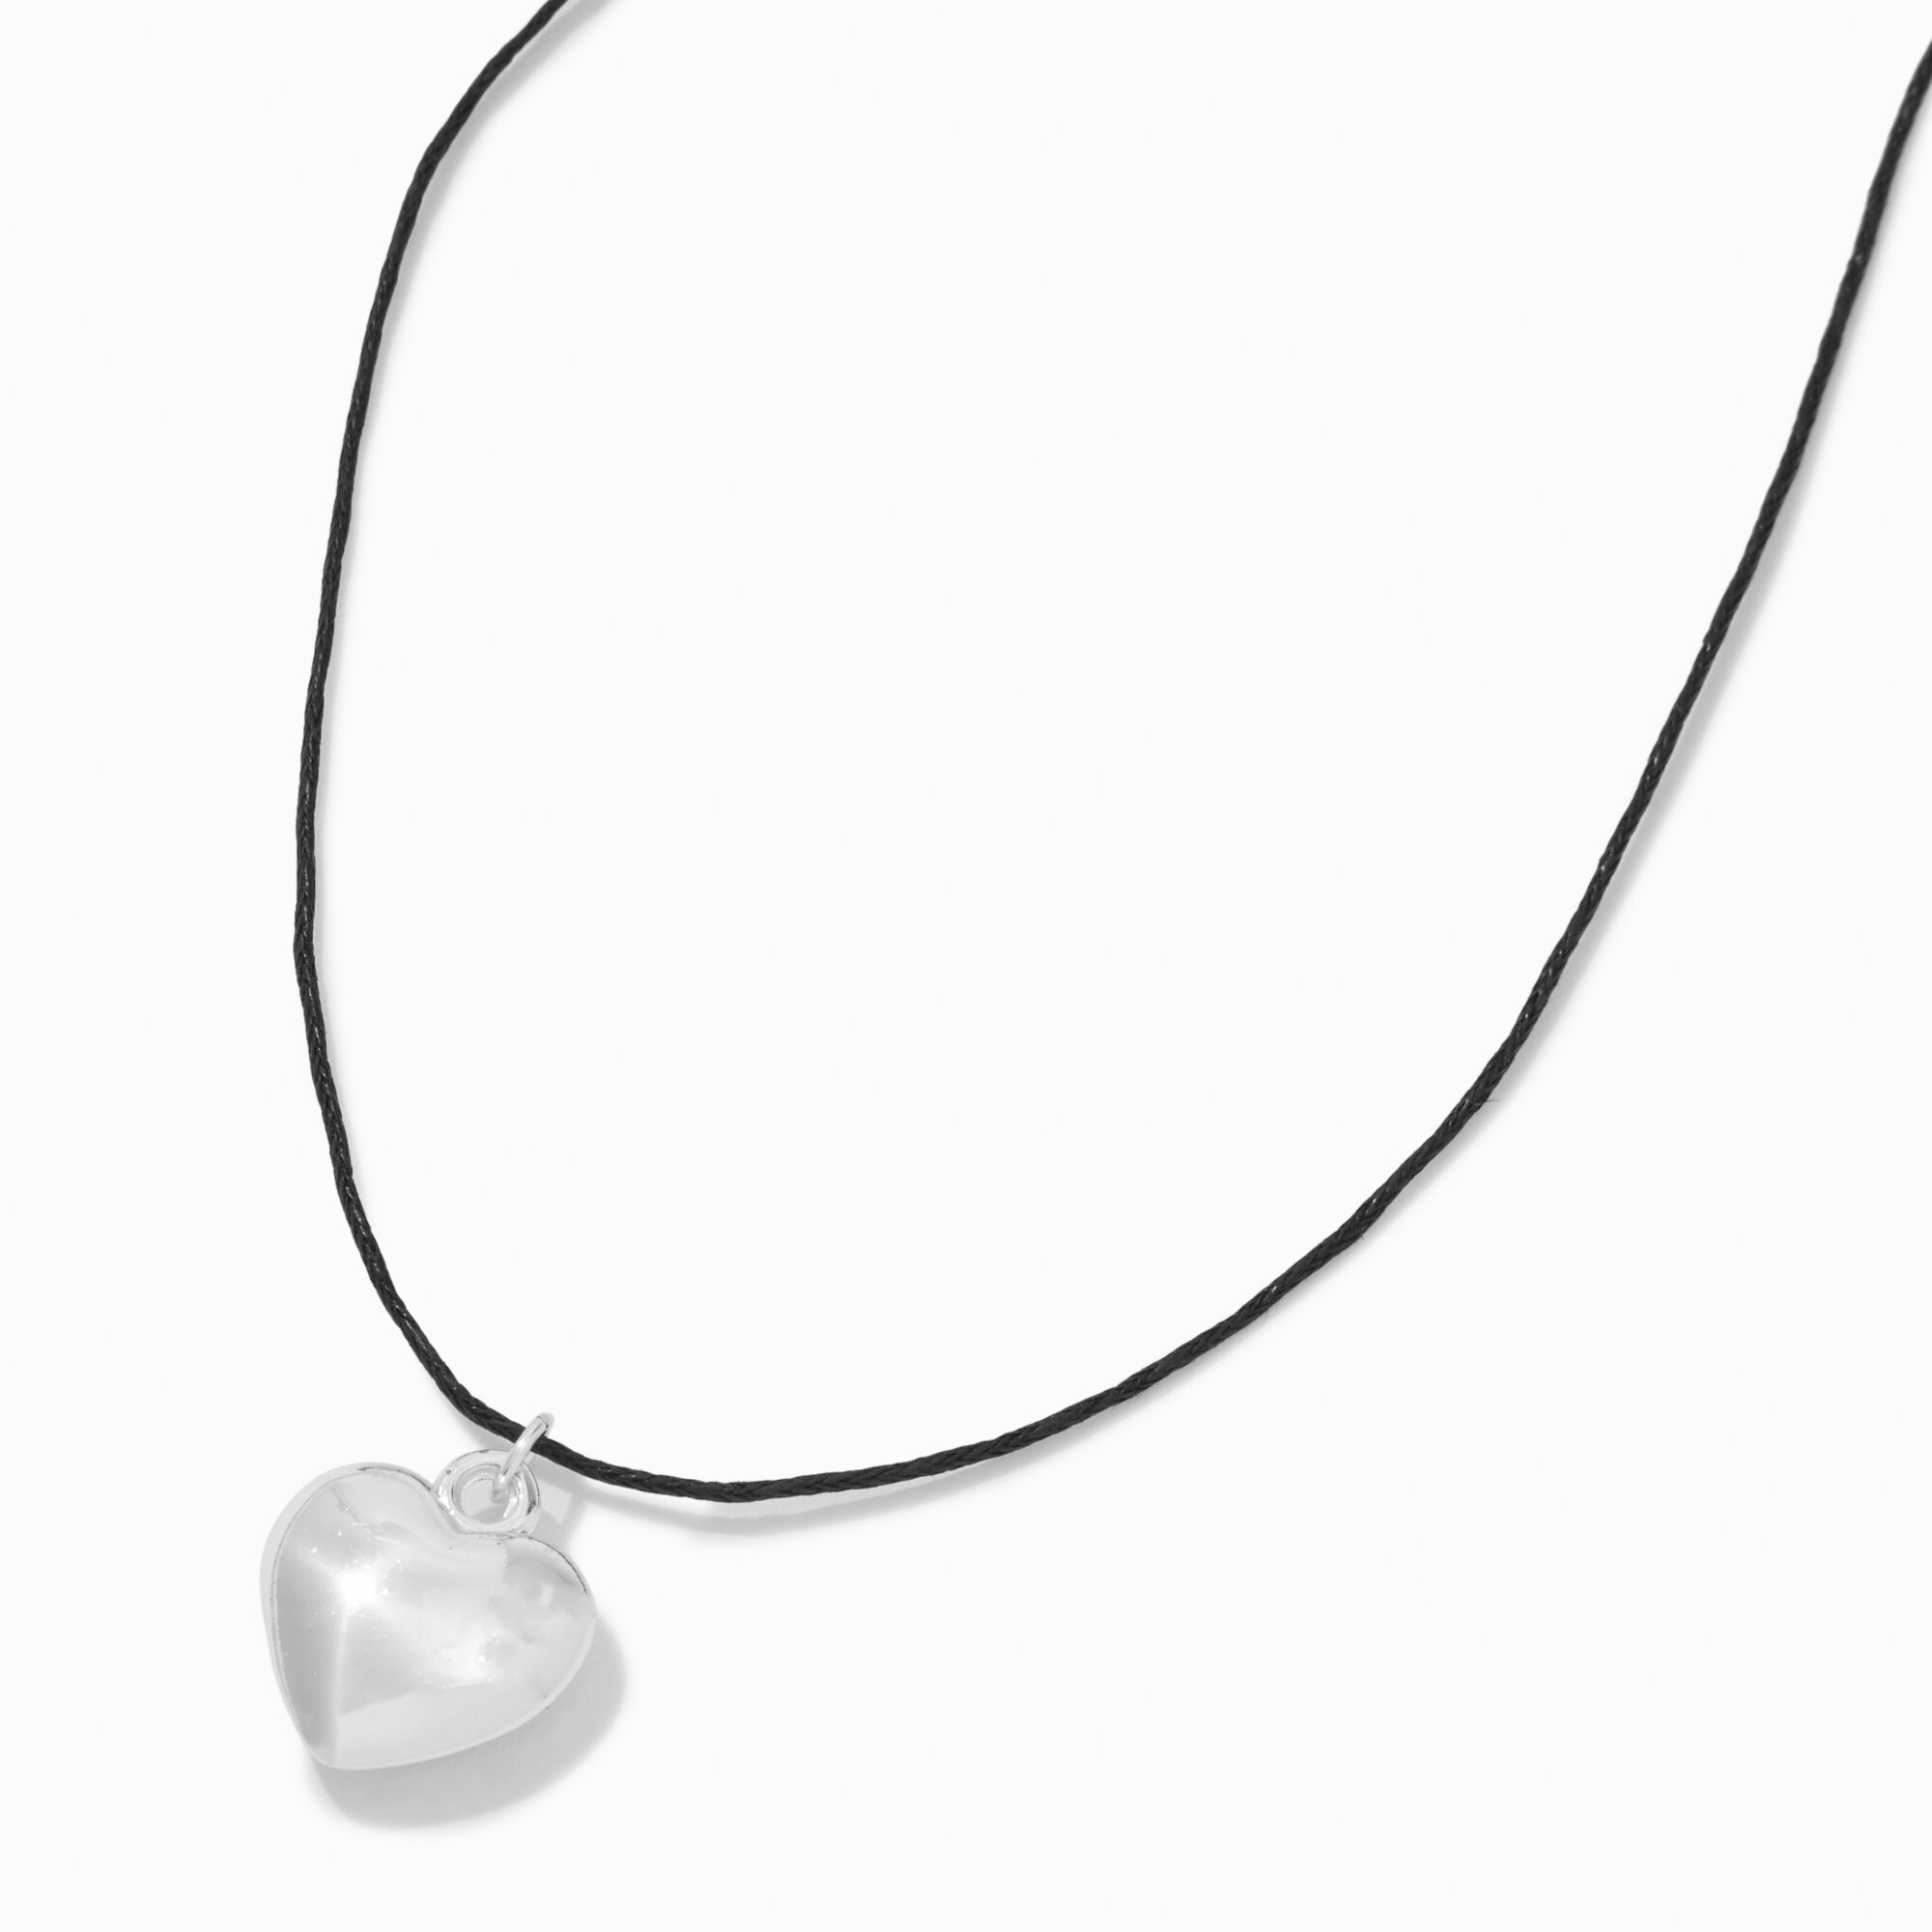 View Claires Puffy SilverTone Heart Cord Pendant Necklace Black information